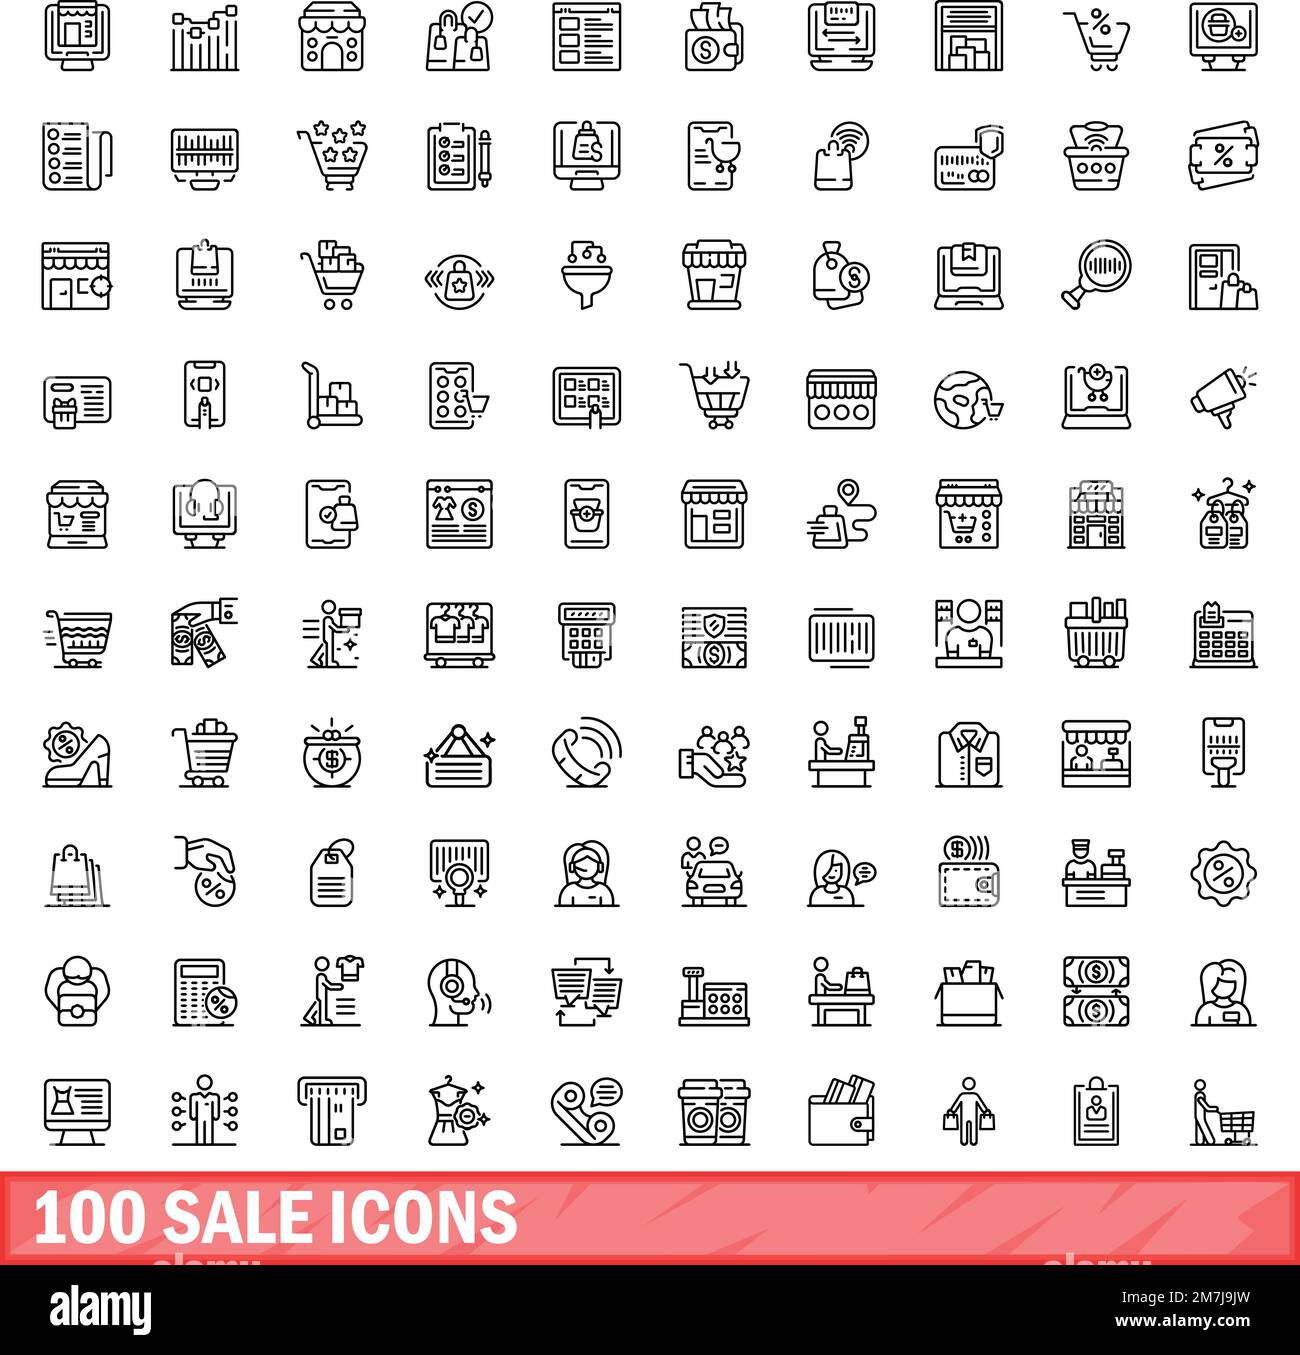 100 sale icons set. Outline illustration of 100 sale icons vector set isolated on white background Stock Vector